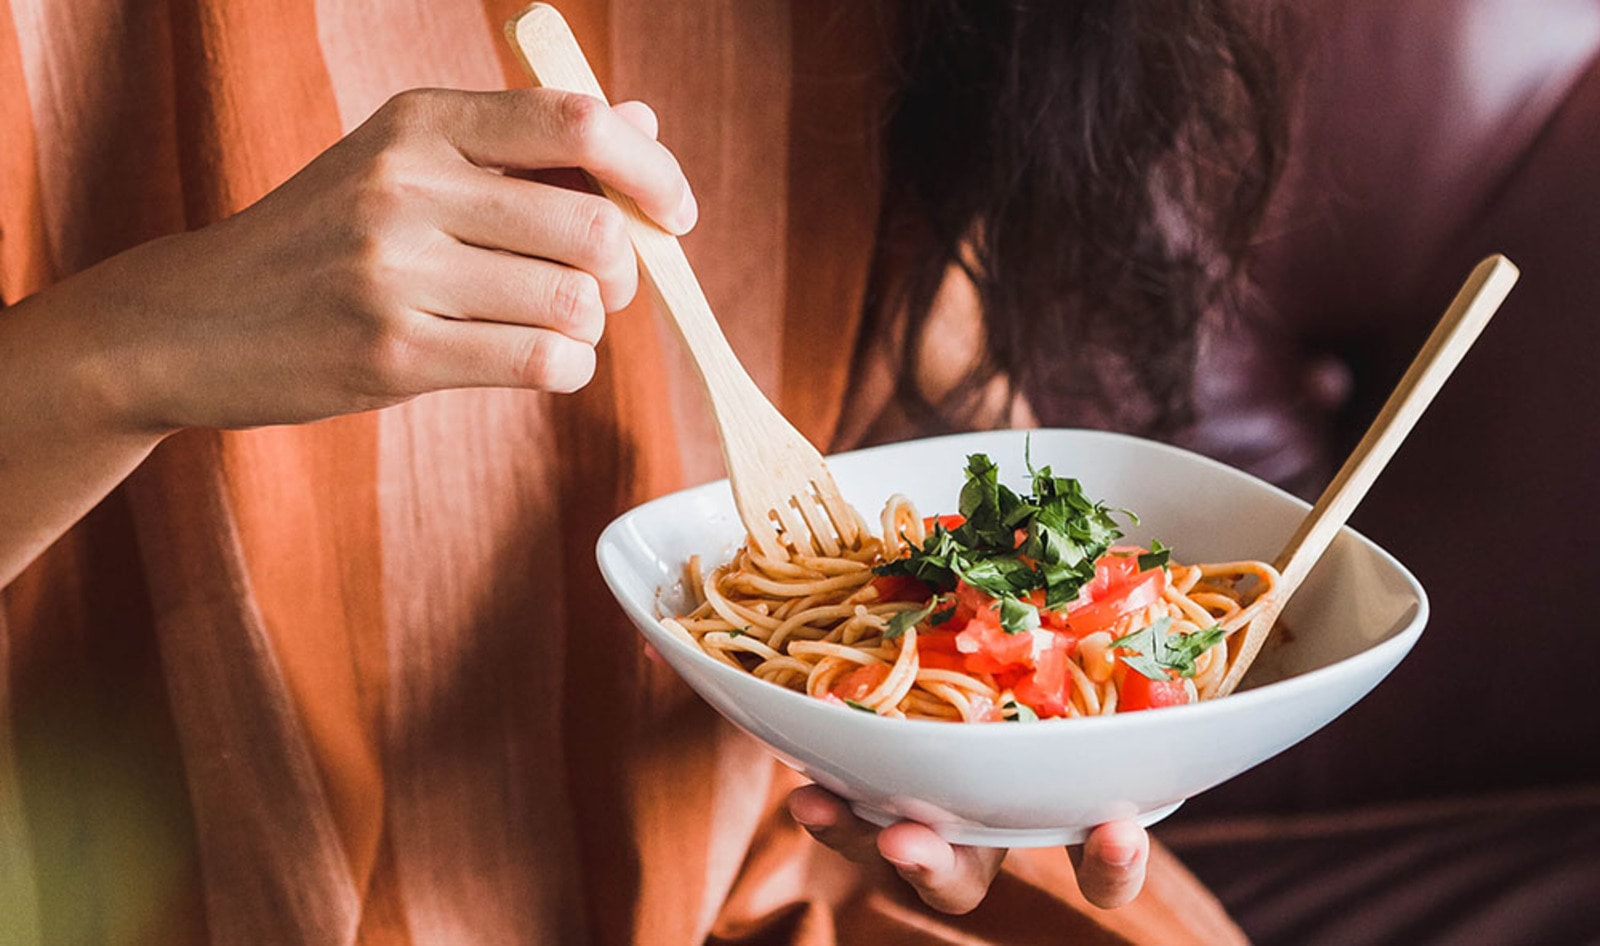 Is Pasta Vegan? What You Need to Know About Your Favorite Noodle Dishes